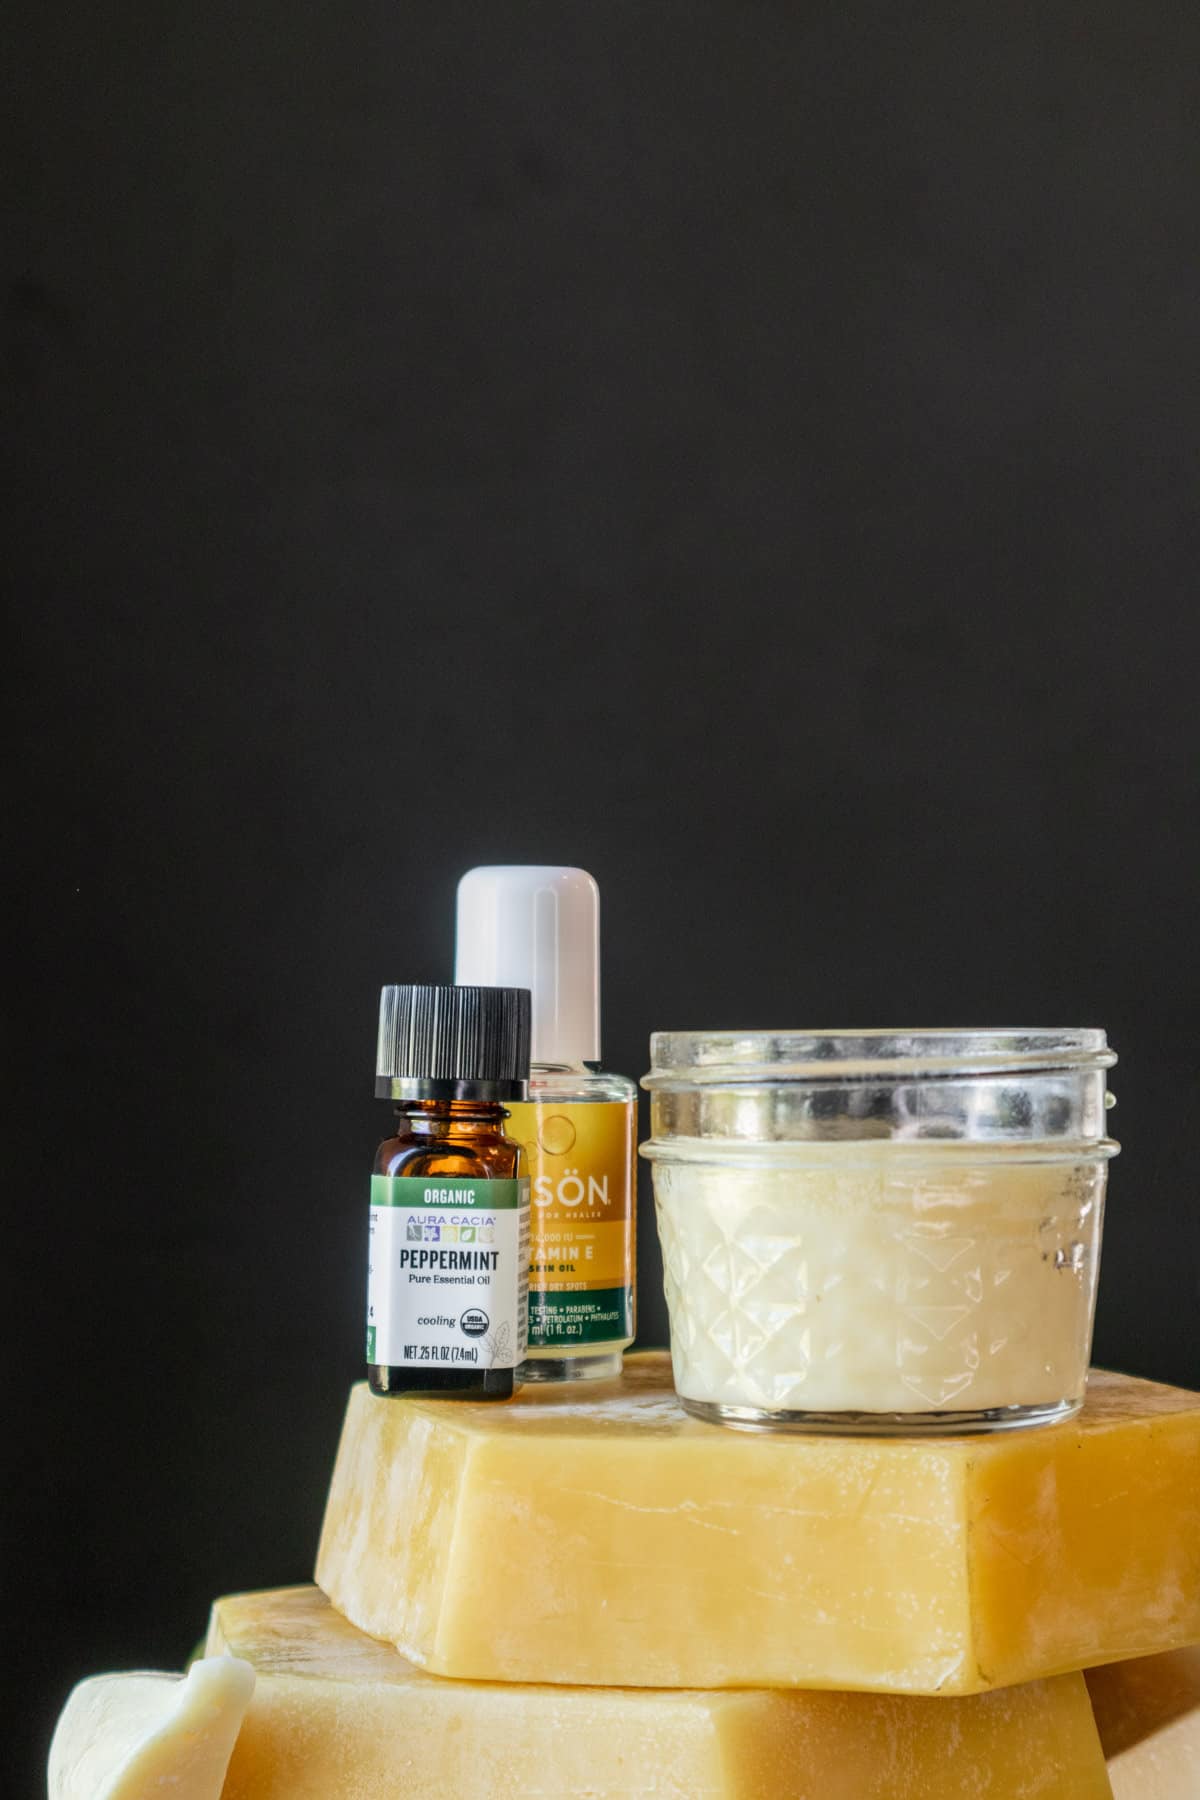 Moisturizing Lip Balm Recipe with Beeswax (or Without Beeswax)